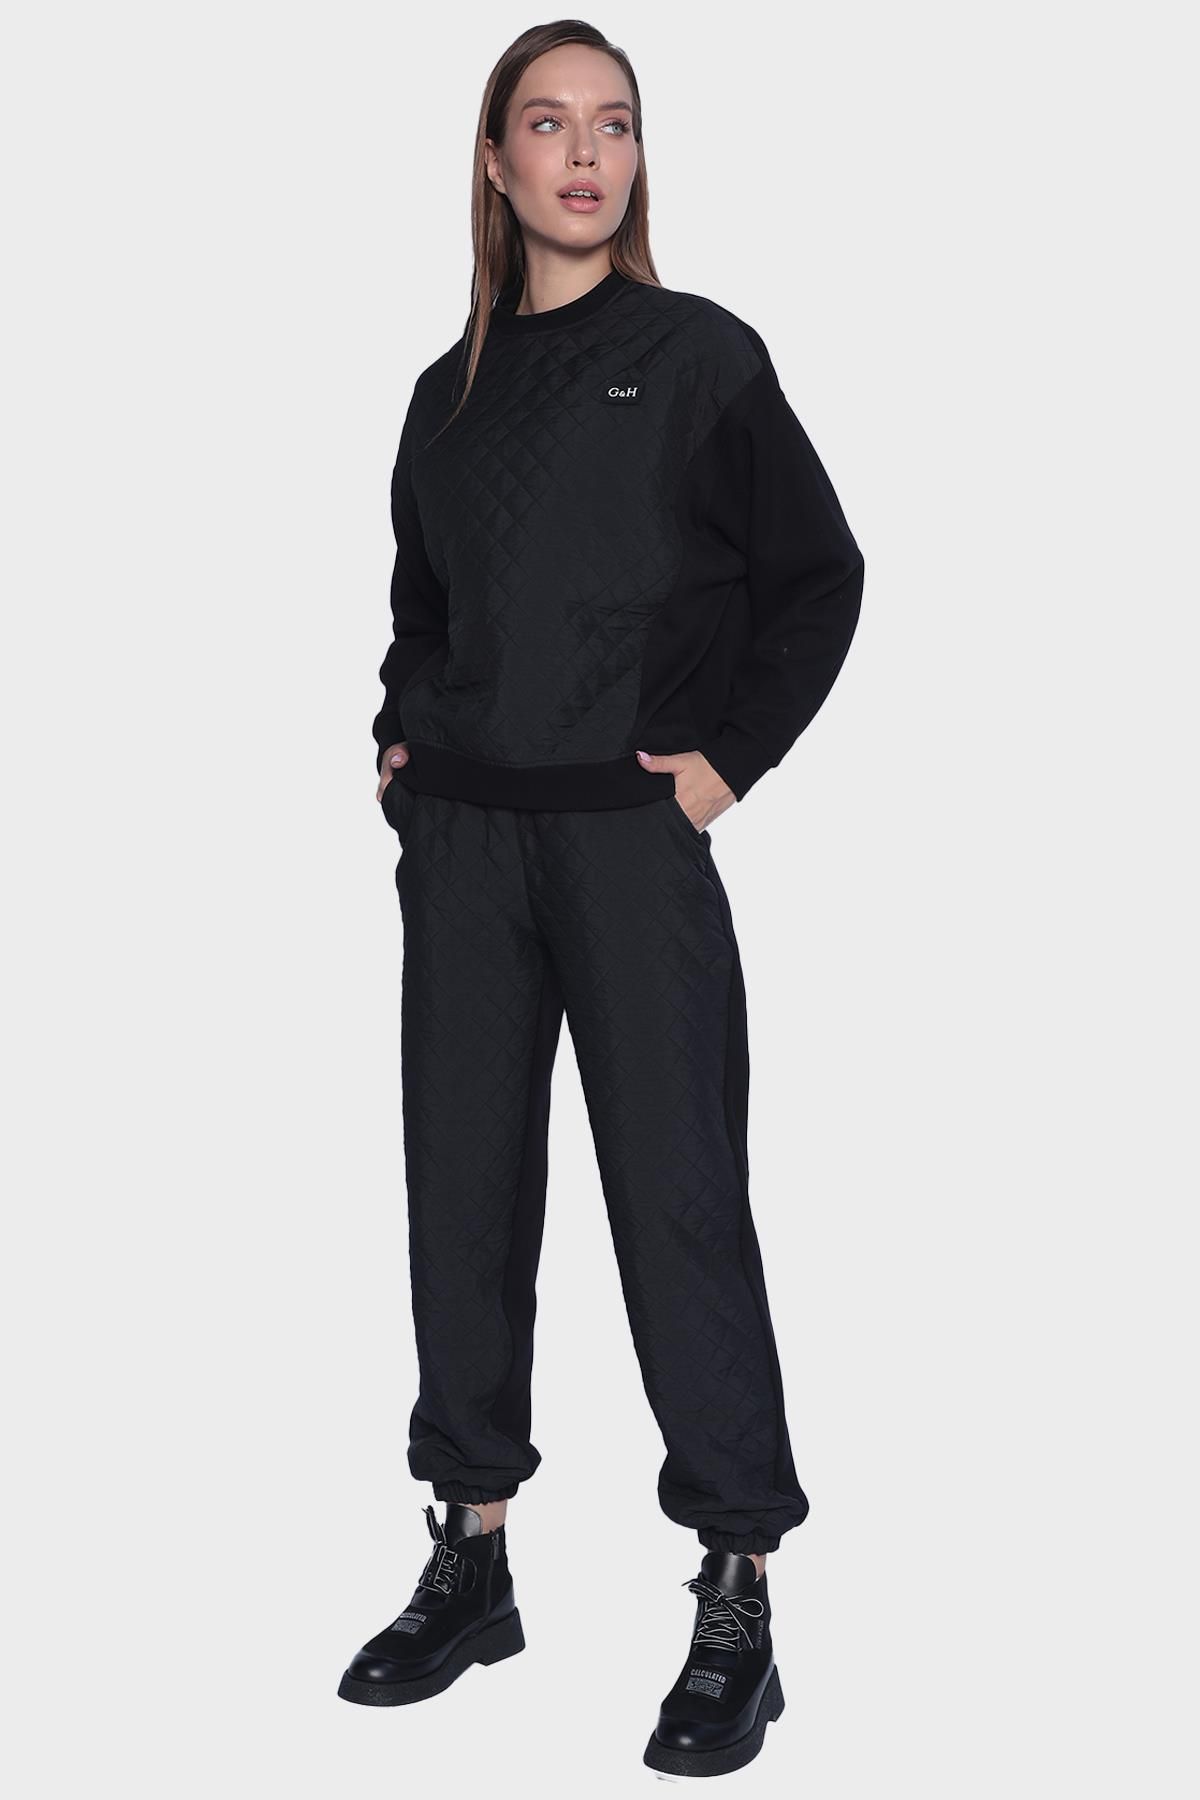 Womens Sports Style Quilted Sweatshirt and Sweatpants Set - Black